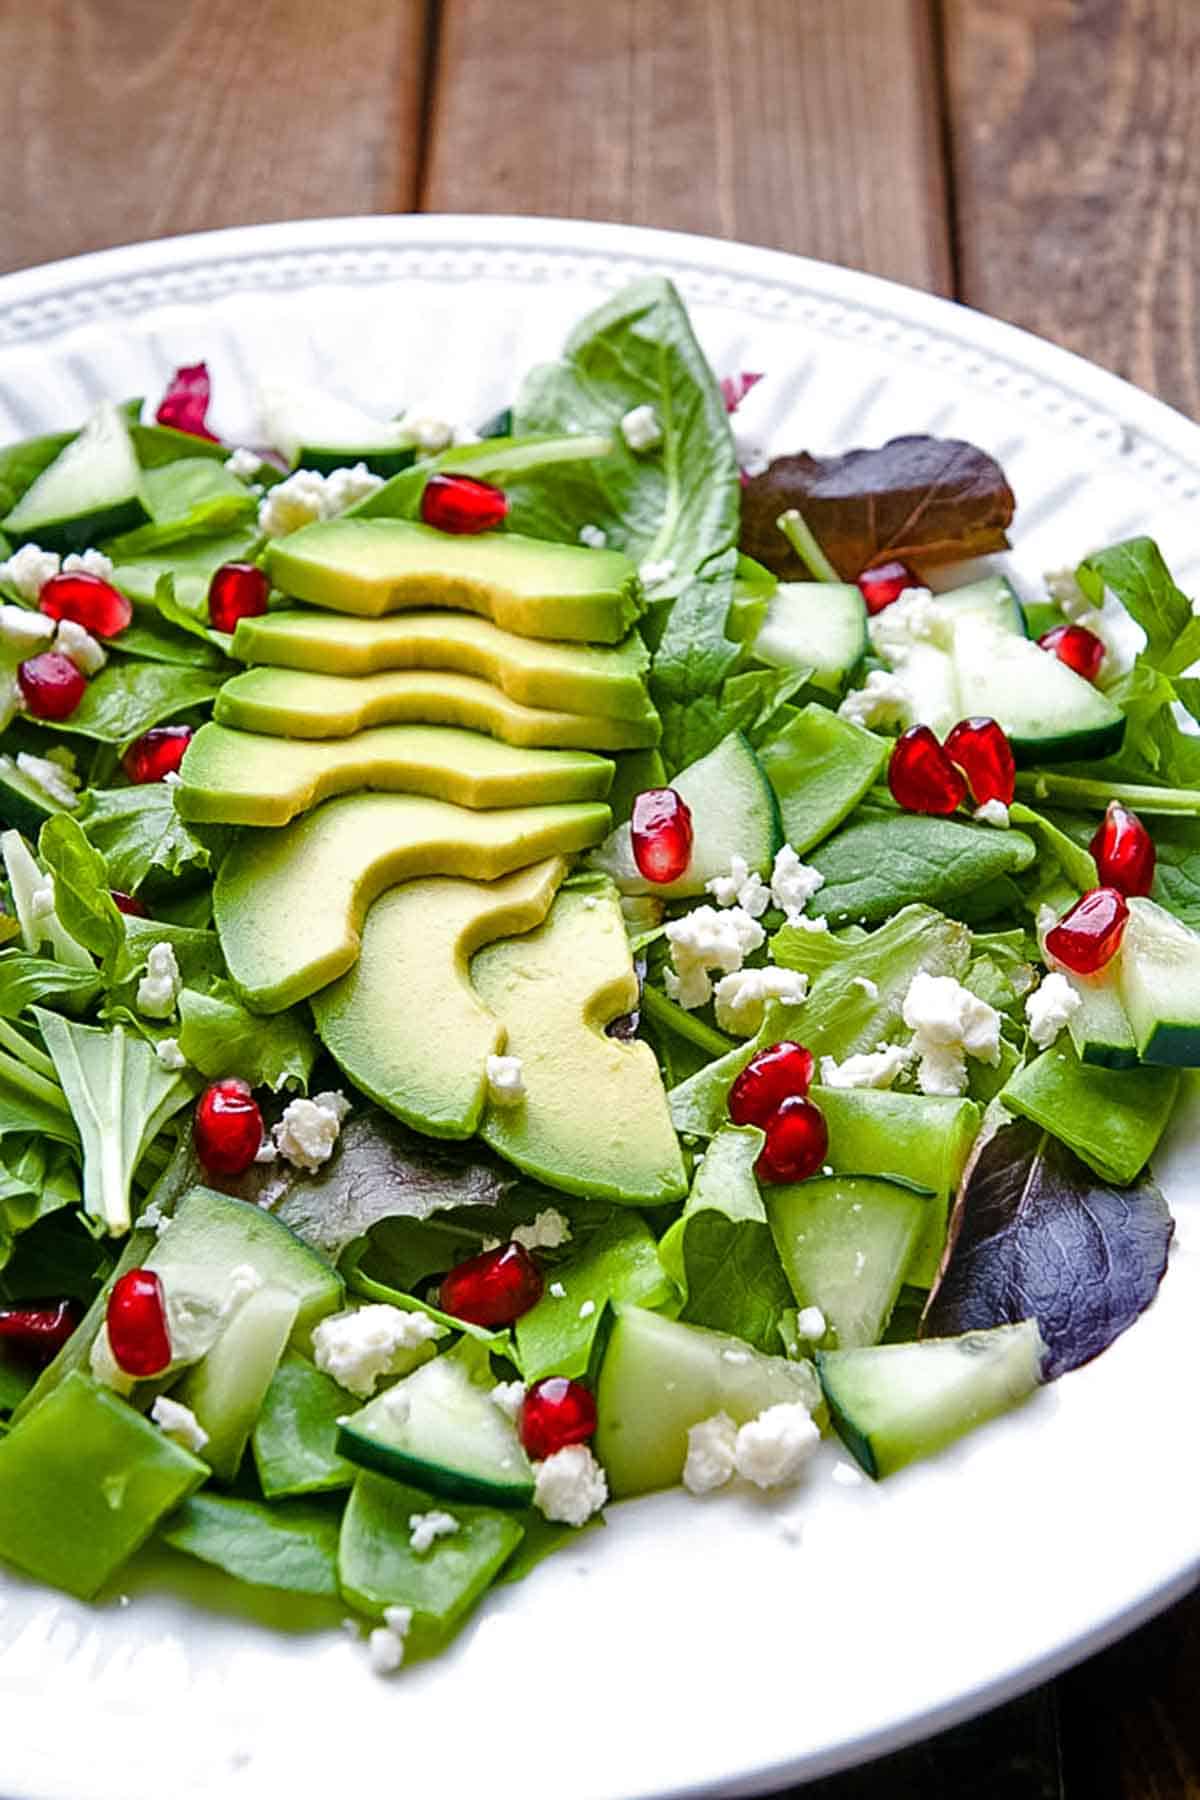 Green Goddess Salad with avocado pomegranate and goat cheese crumbles